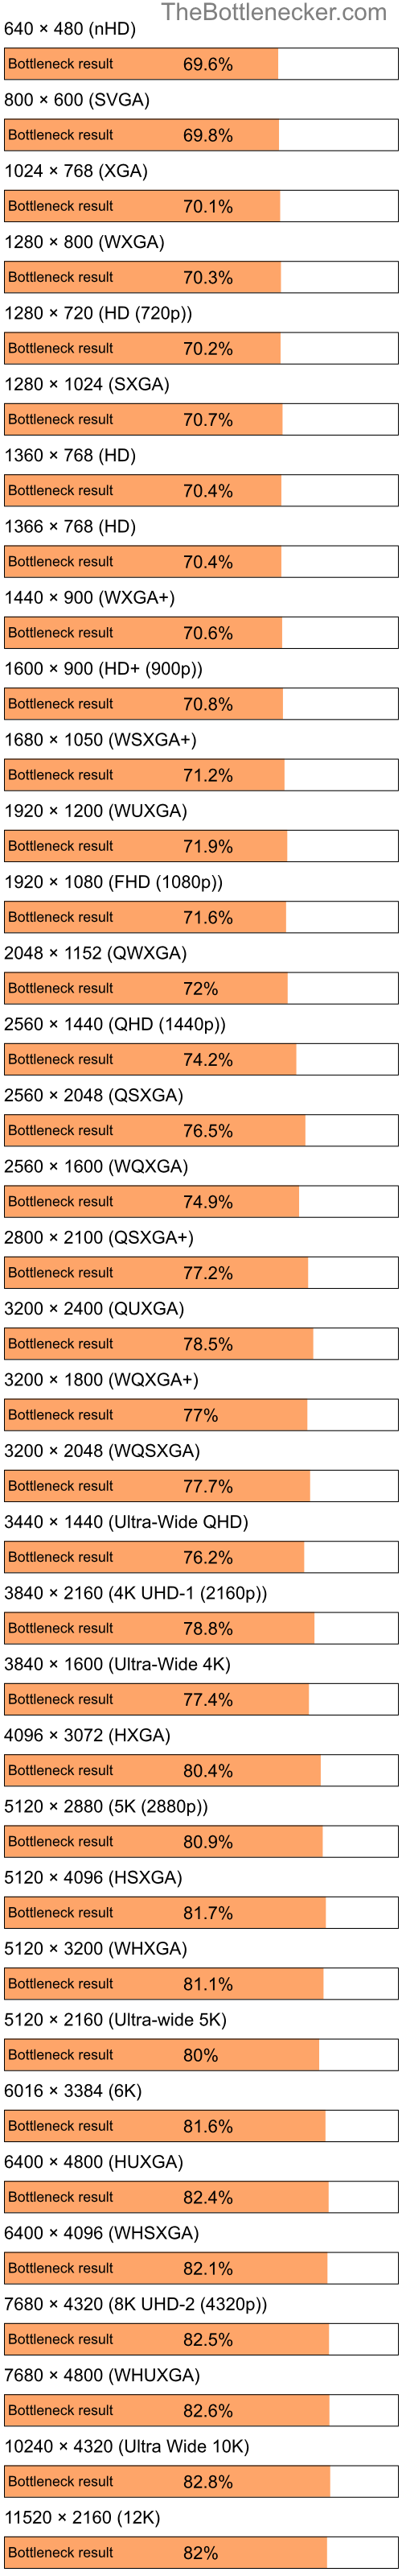 Bottleneck results by resolution for Intel Celeron M 420 and AMD Mobility Radeon X1700 in Graphic Card Intense Tasks